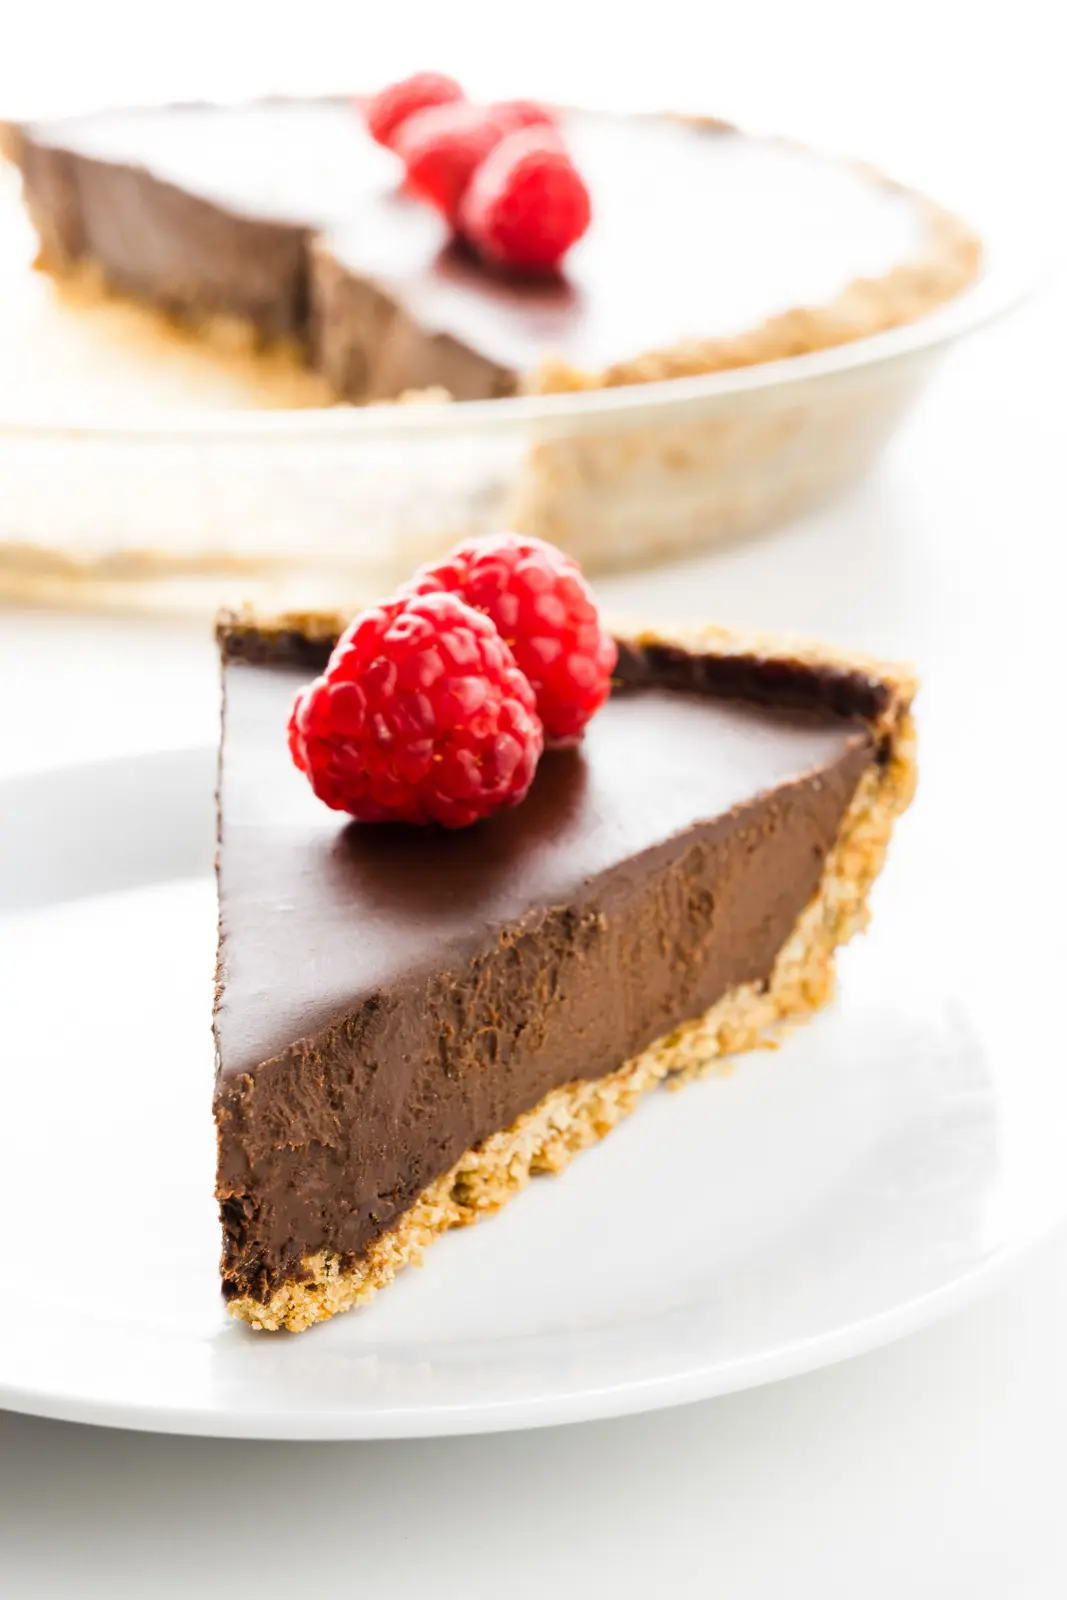 A slice of chocolate pie has raspberries on top. The rest of the pie is behind it.